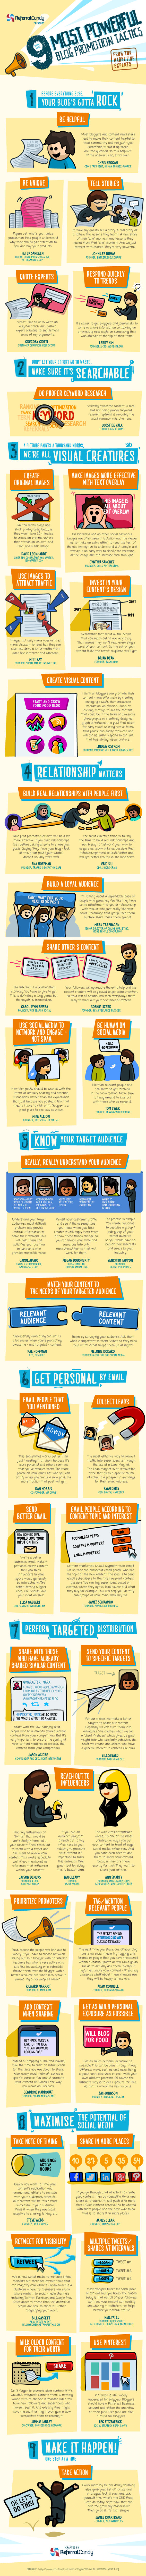 The 9 Most Powerful Blog Promotion Tactics From Top Marketing Experts [Infographic]